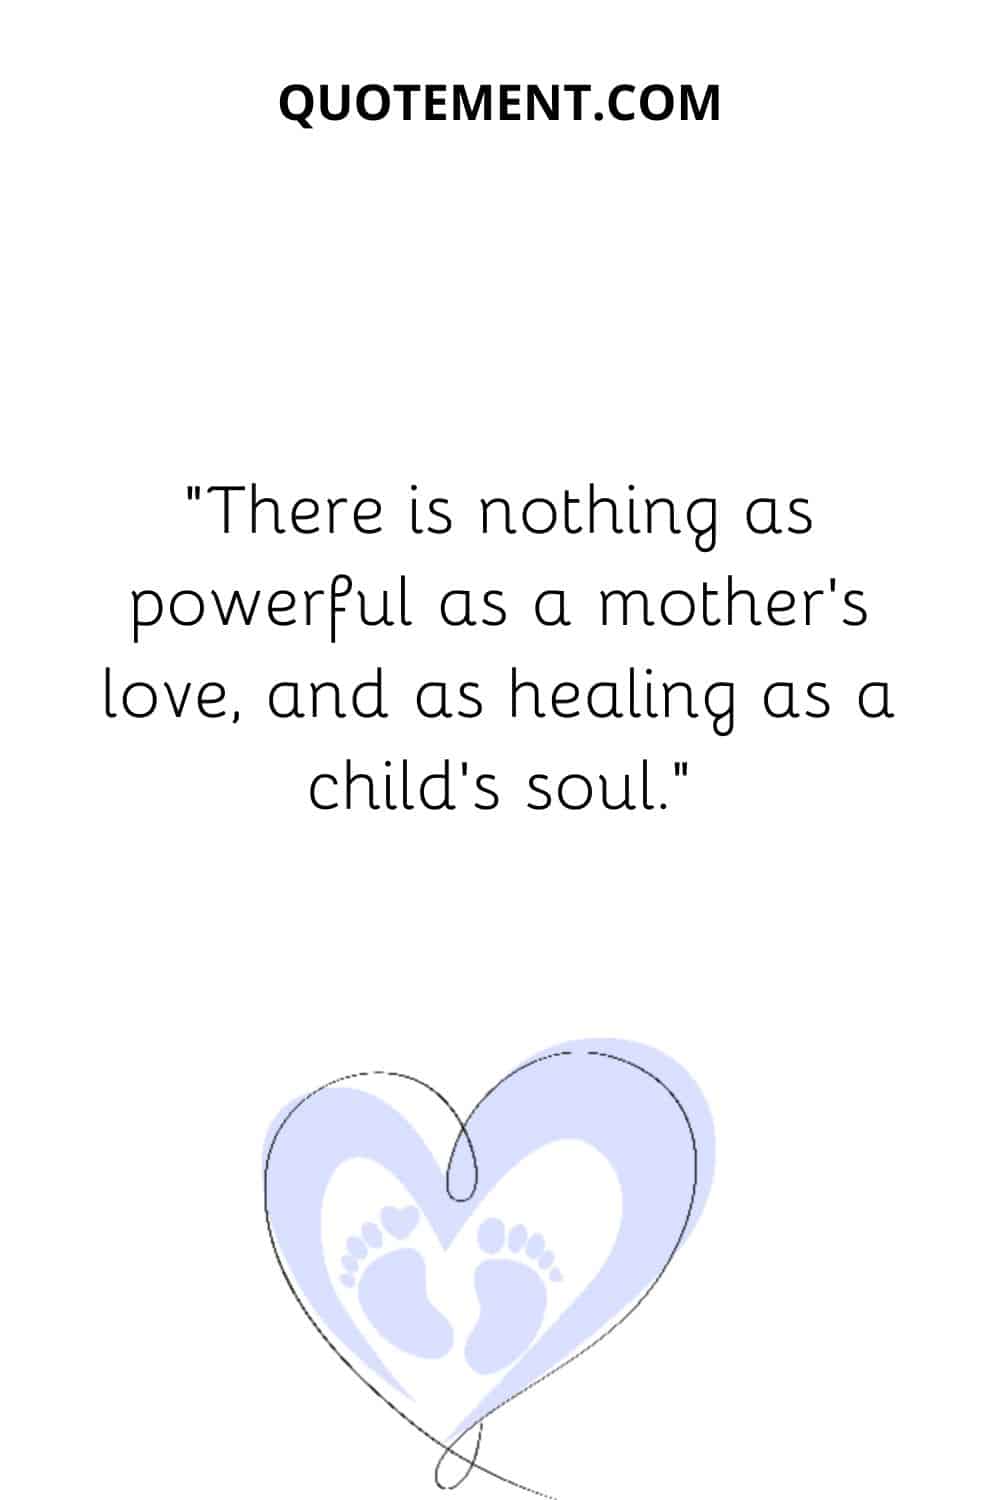 There is nothing as powerful as a mother’s love